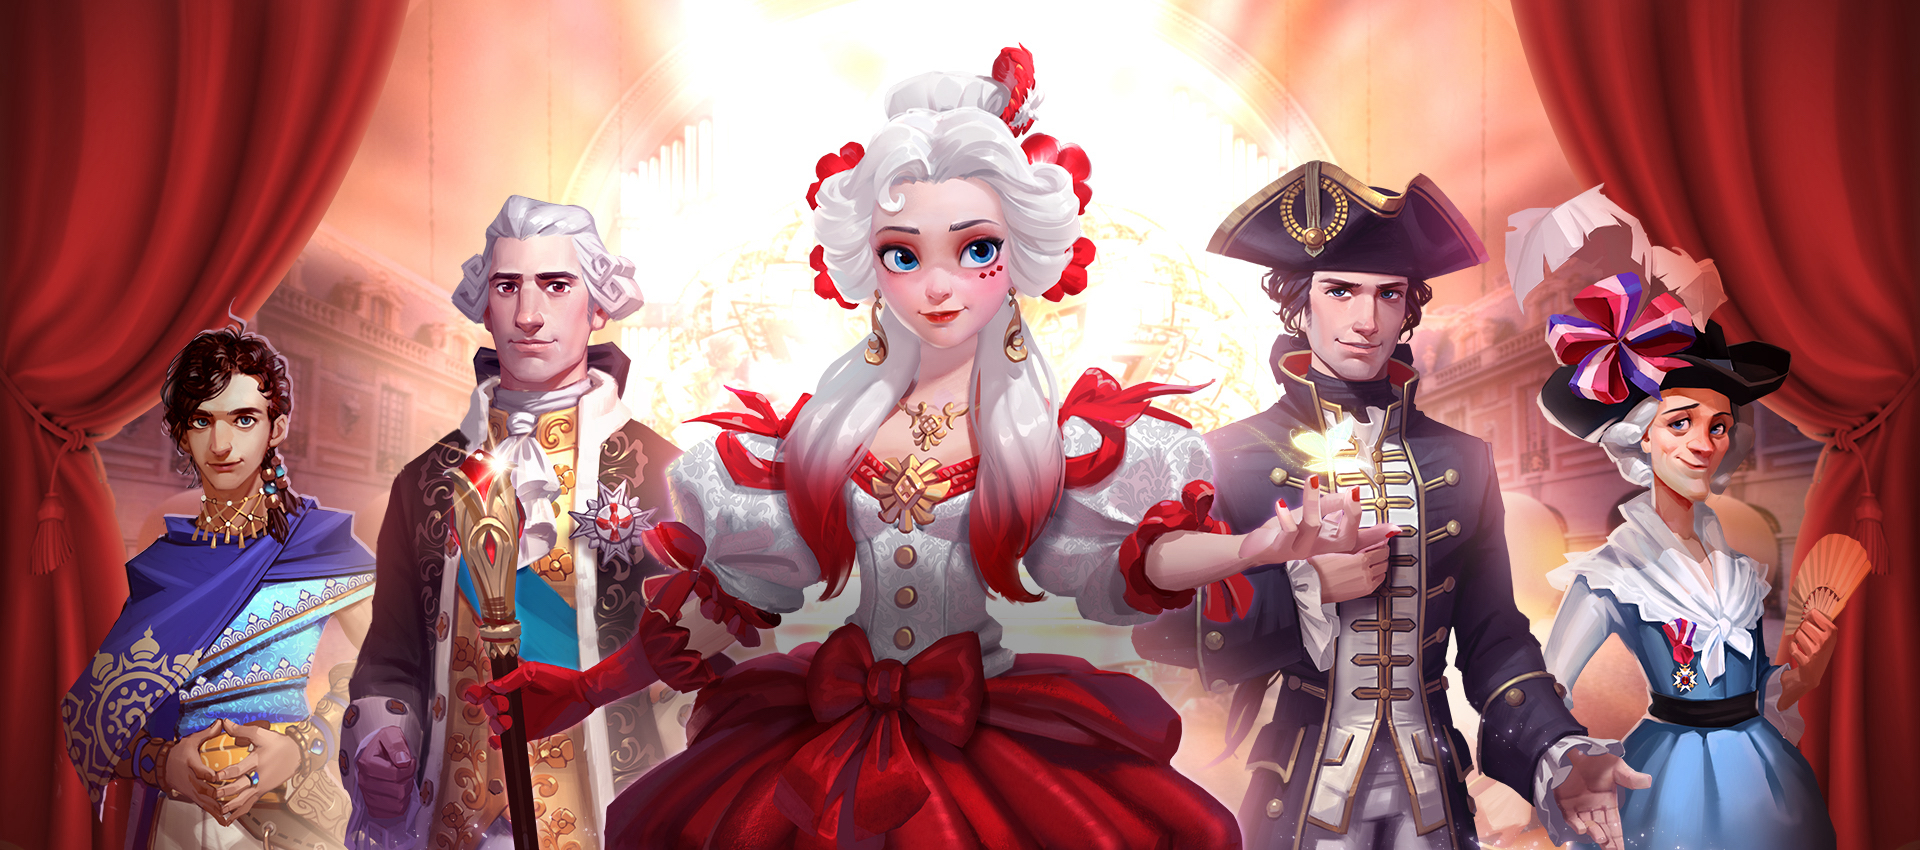 Why Time Princess Dress Up S Innovative Approach To Customization Games Works Most customizable dress up game